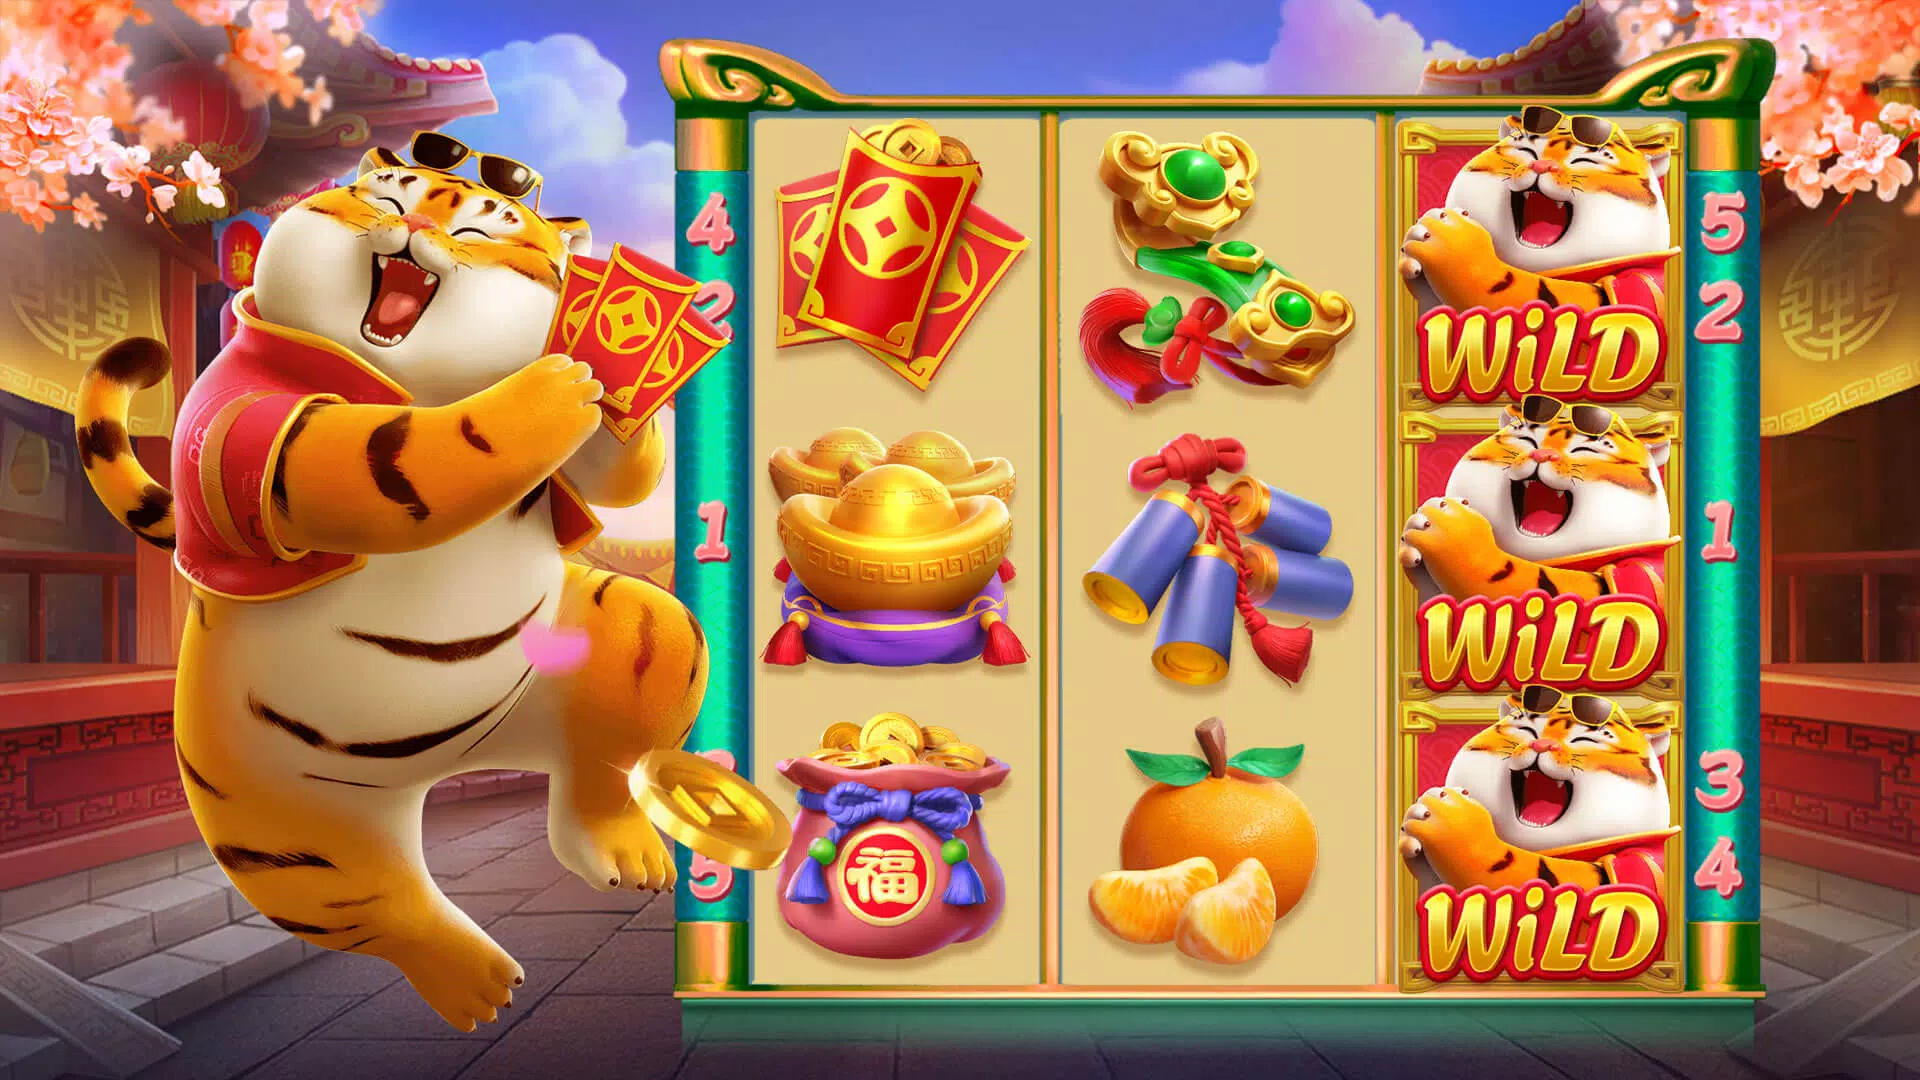 Fortune Tiger APK for Android Download